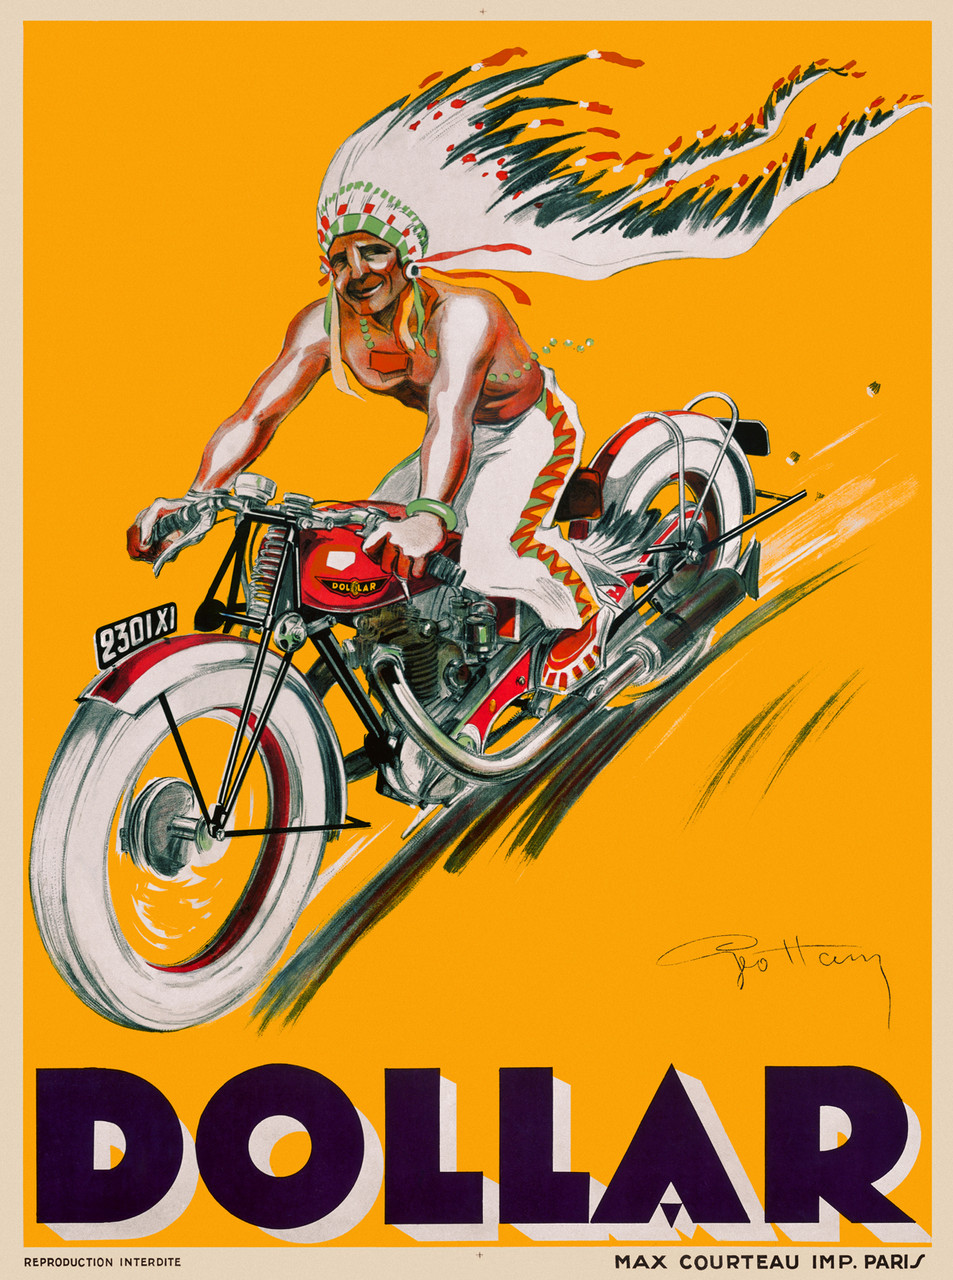 Motorcycles Dollar by Geo Ham 1920 France Vintage Poster Reproduction. This French transportation poster features a native American in feather headdress riding a motorcycle across a yellow background. Giclee Advertising Prints. Classic Posters